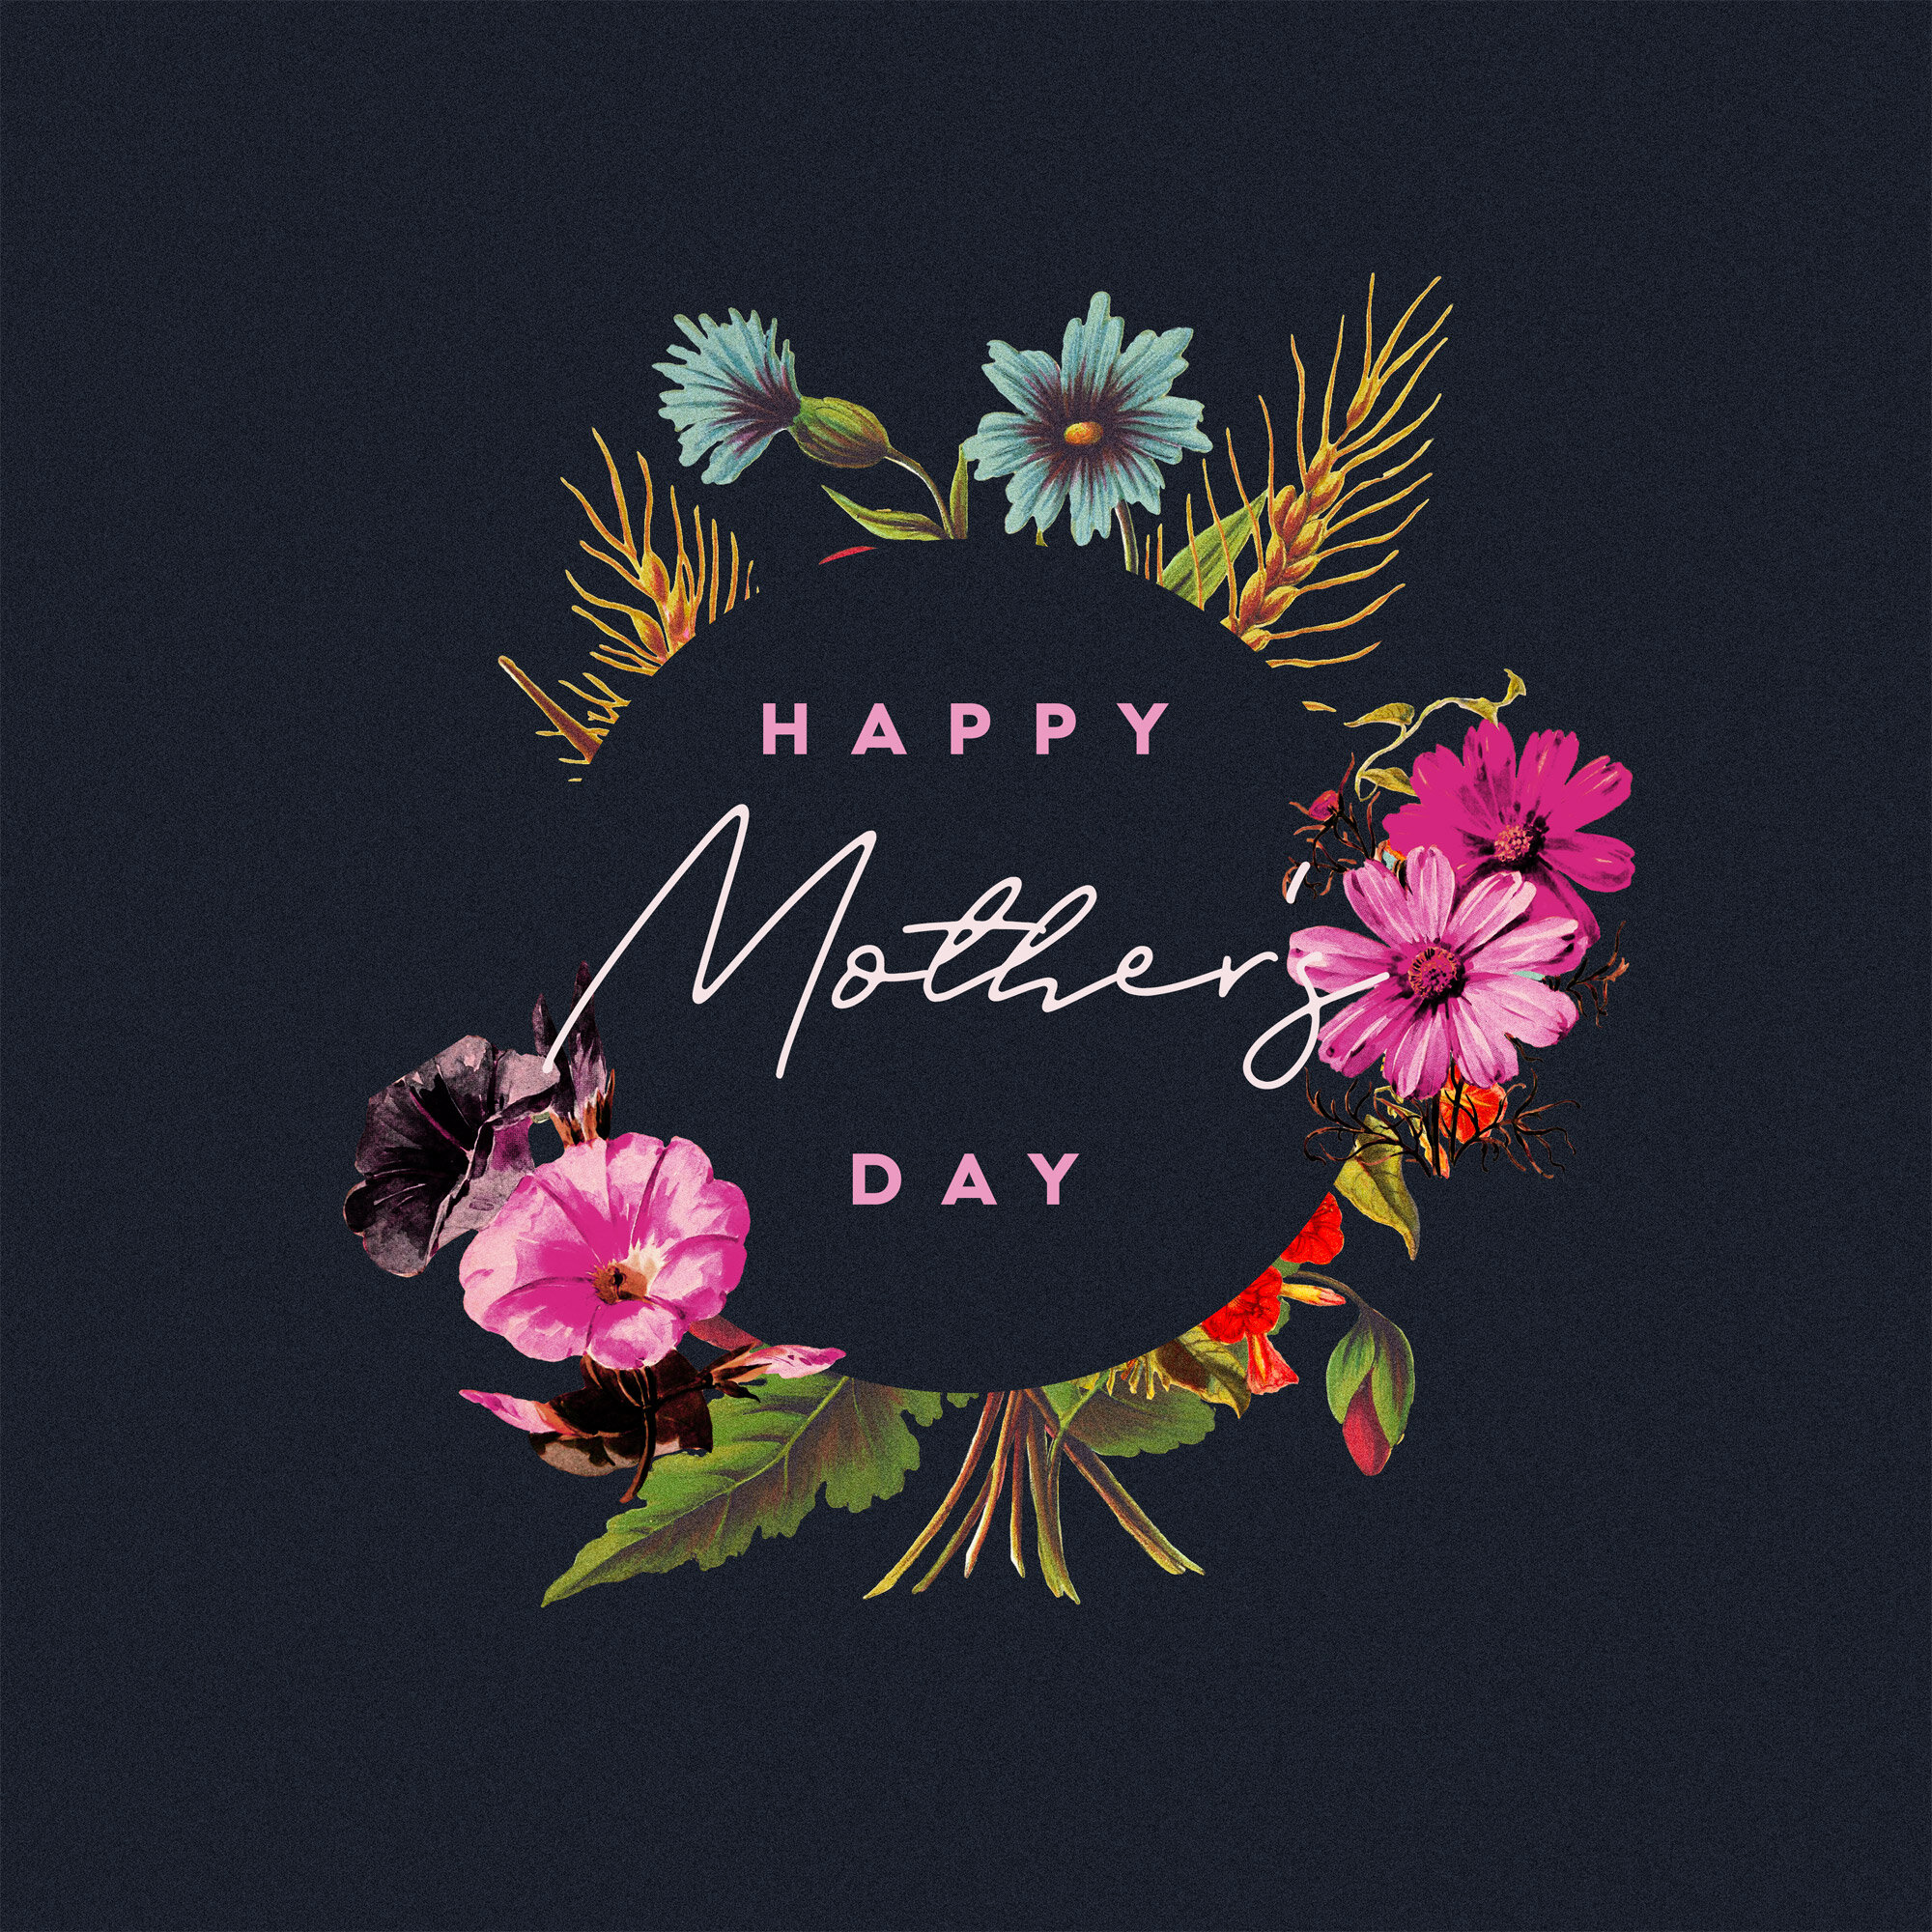 Happy Mother's Day to all moms of all kinds: the parent, the strong woman mentor, the stand-in sibling. We are so thankful for you and honor you today! 

&quot;She opens her mouth with wisdom, and the teaching of kindness is on her tongue.&quot; - Pr